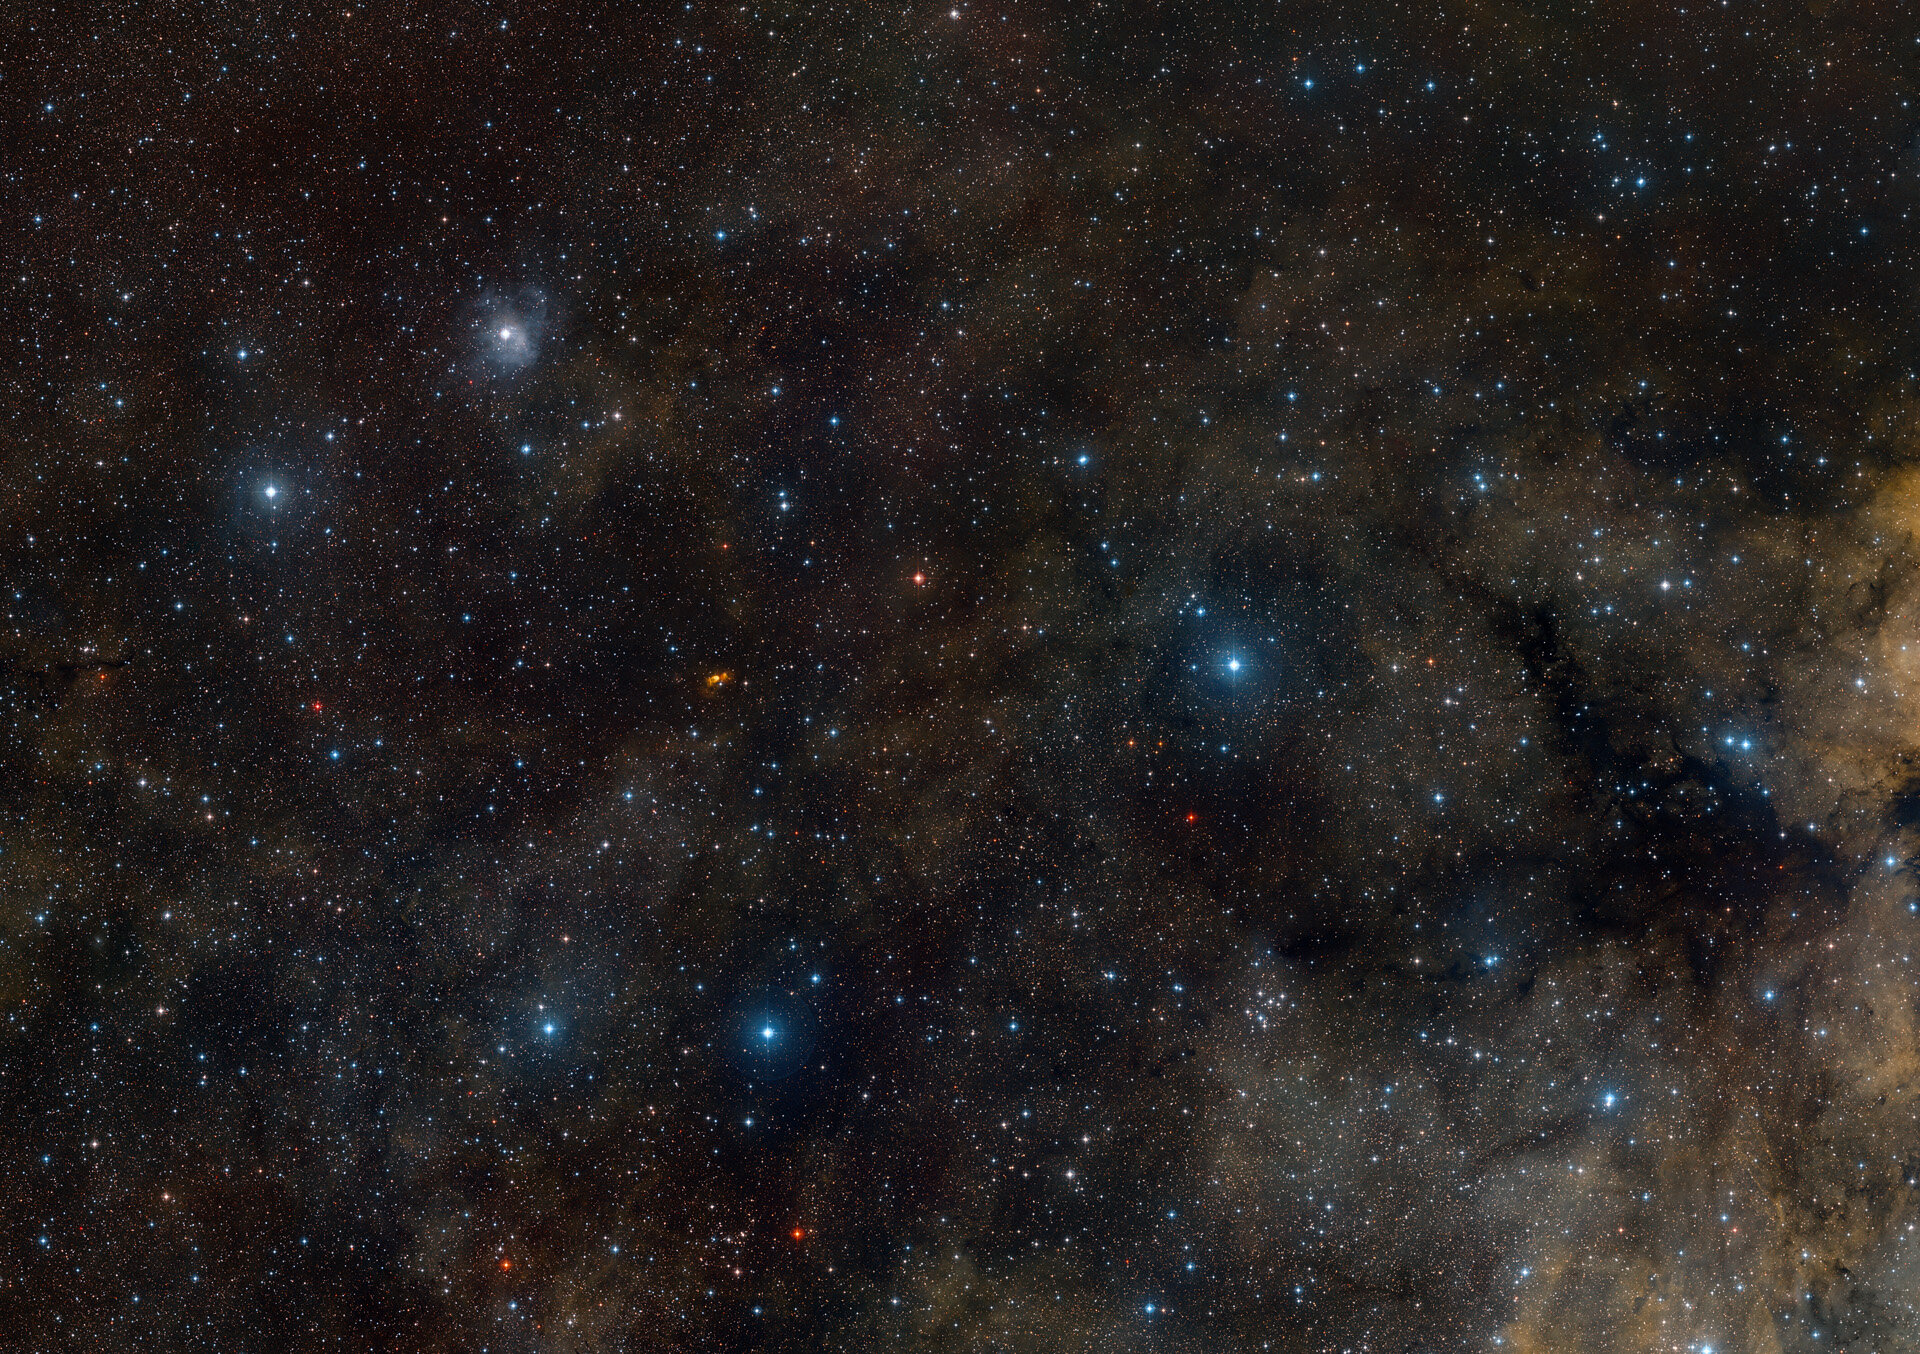 Ground-based view of the area around star-forming region S 106